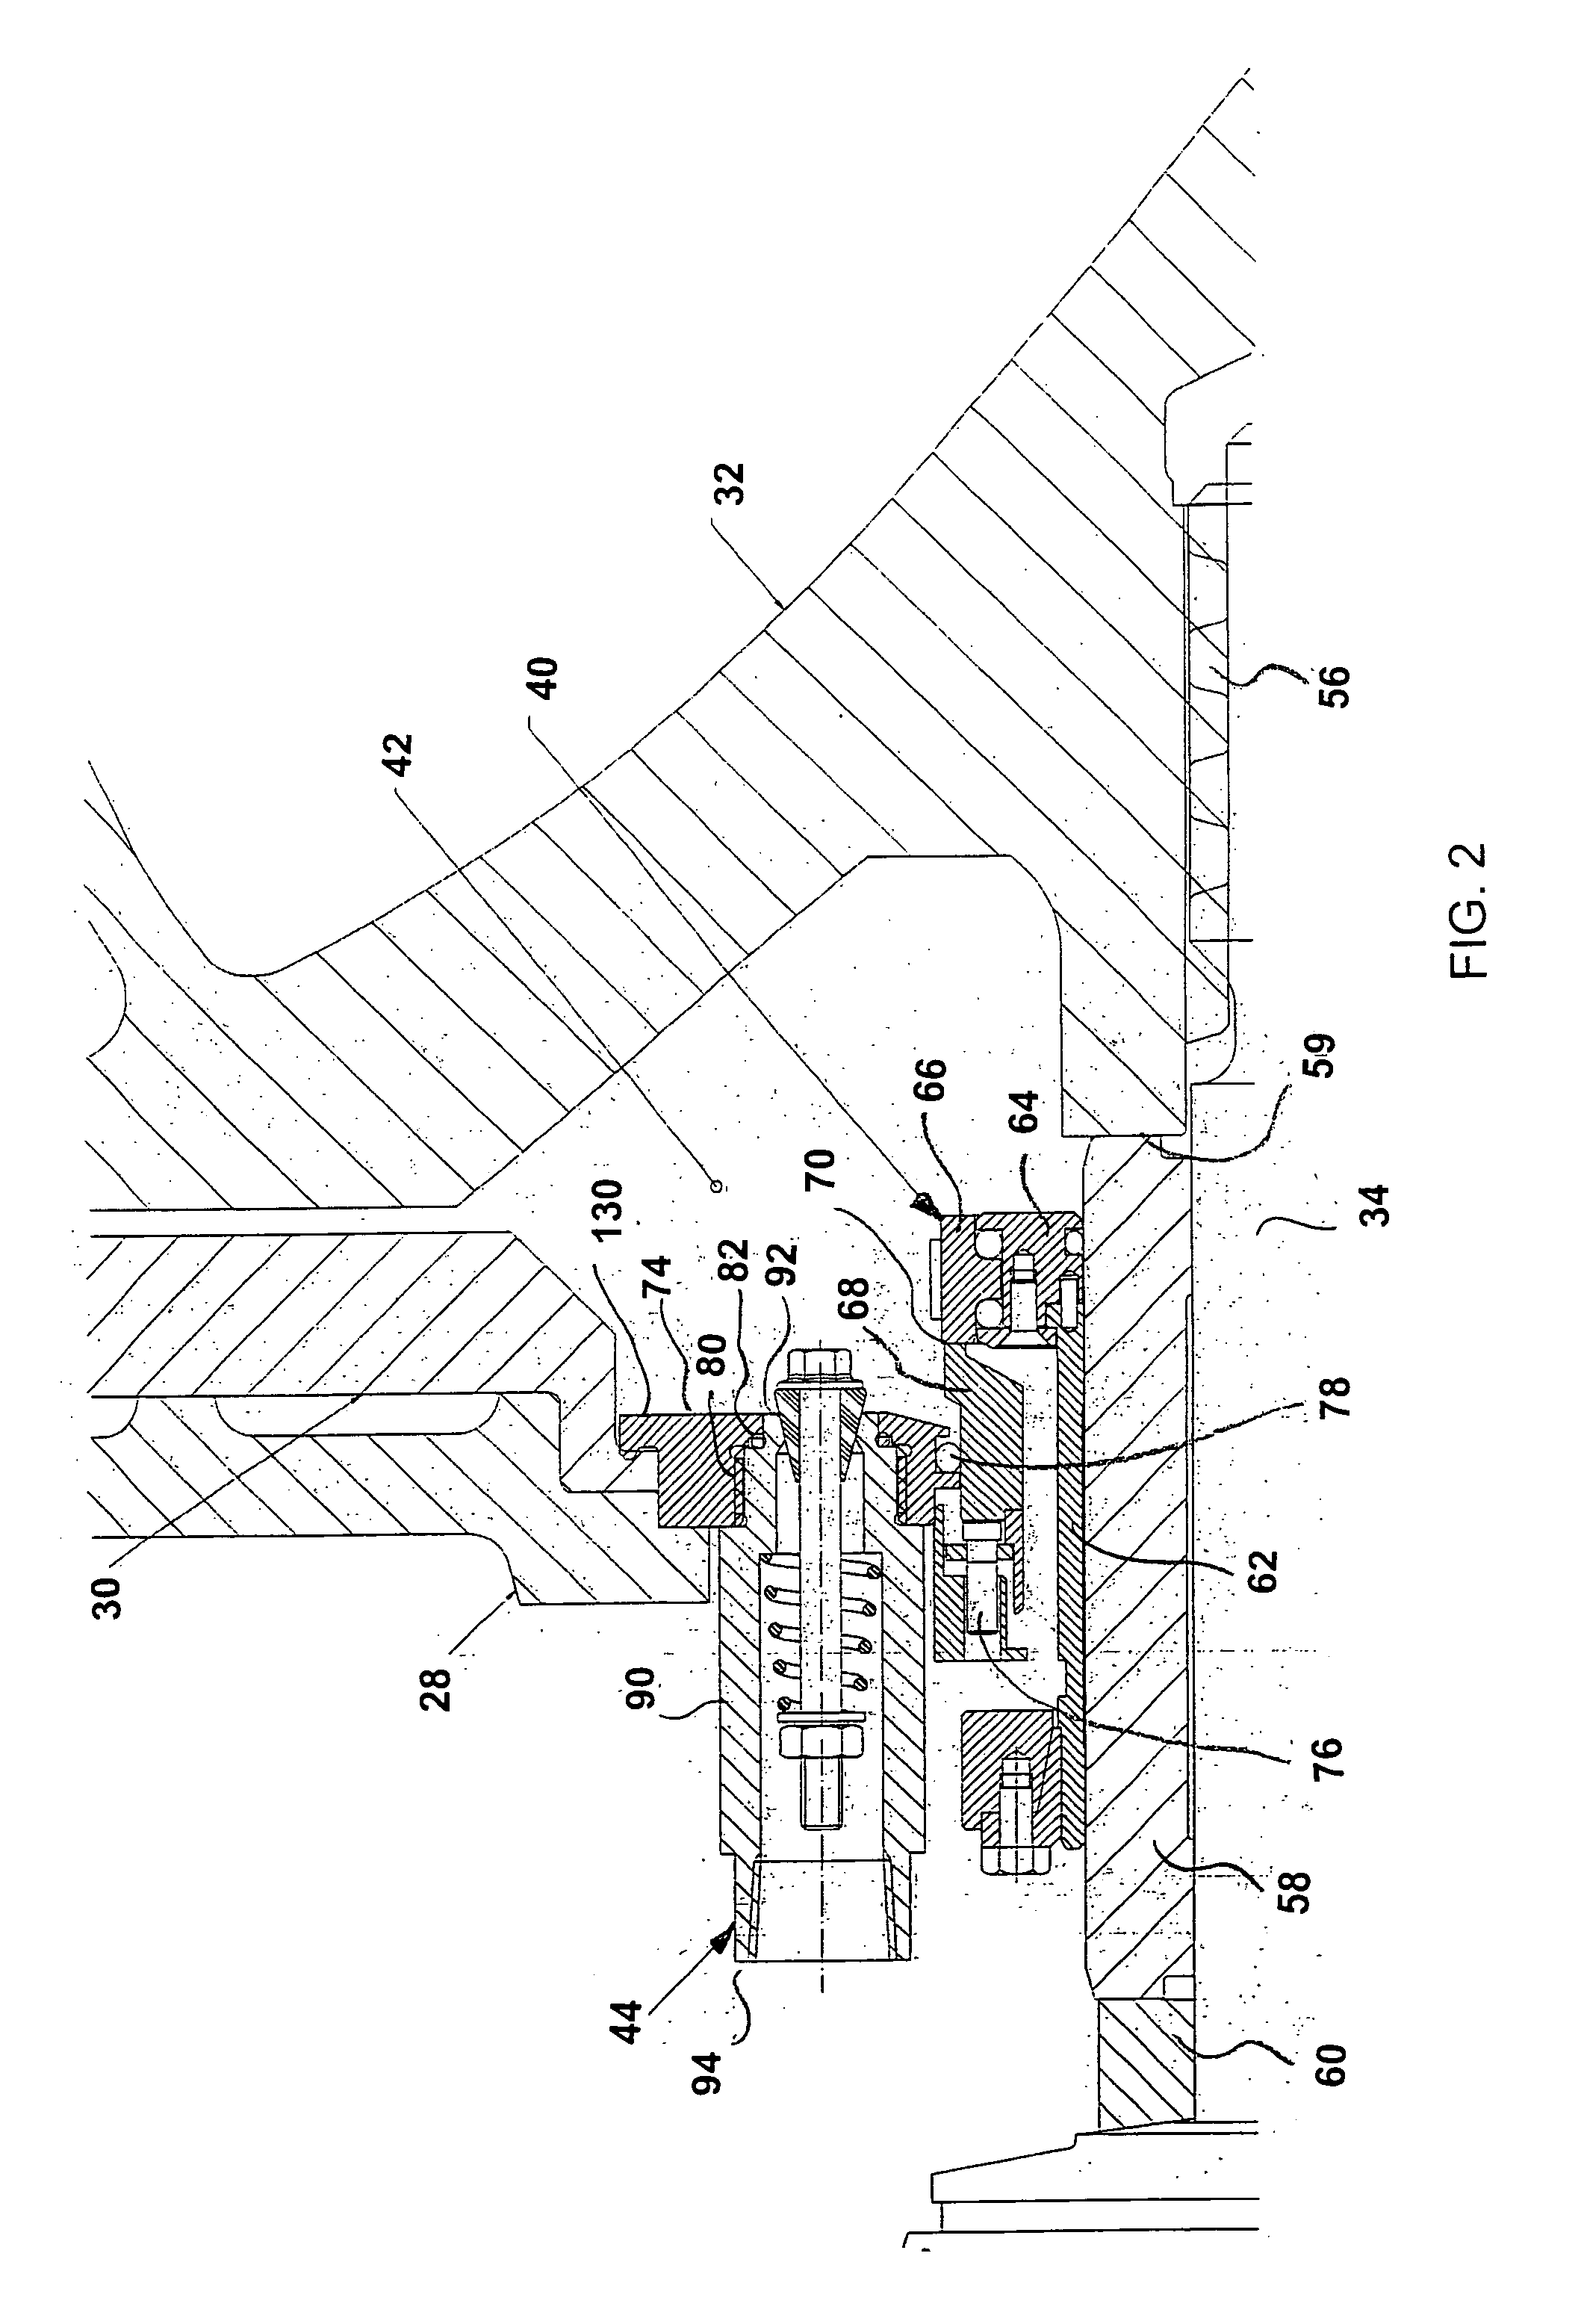 Seal chamber conditioning valve for a rotodynamic pump